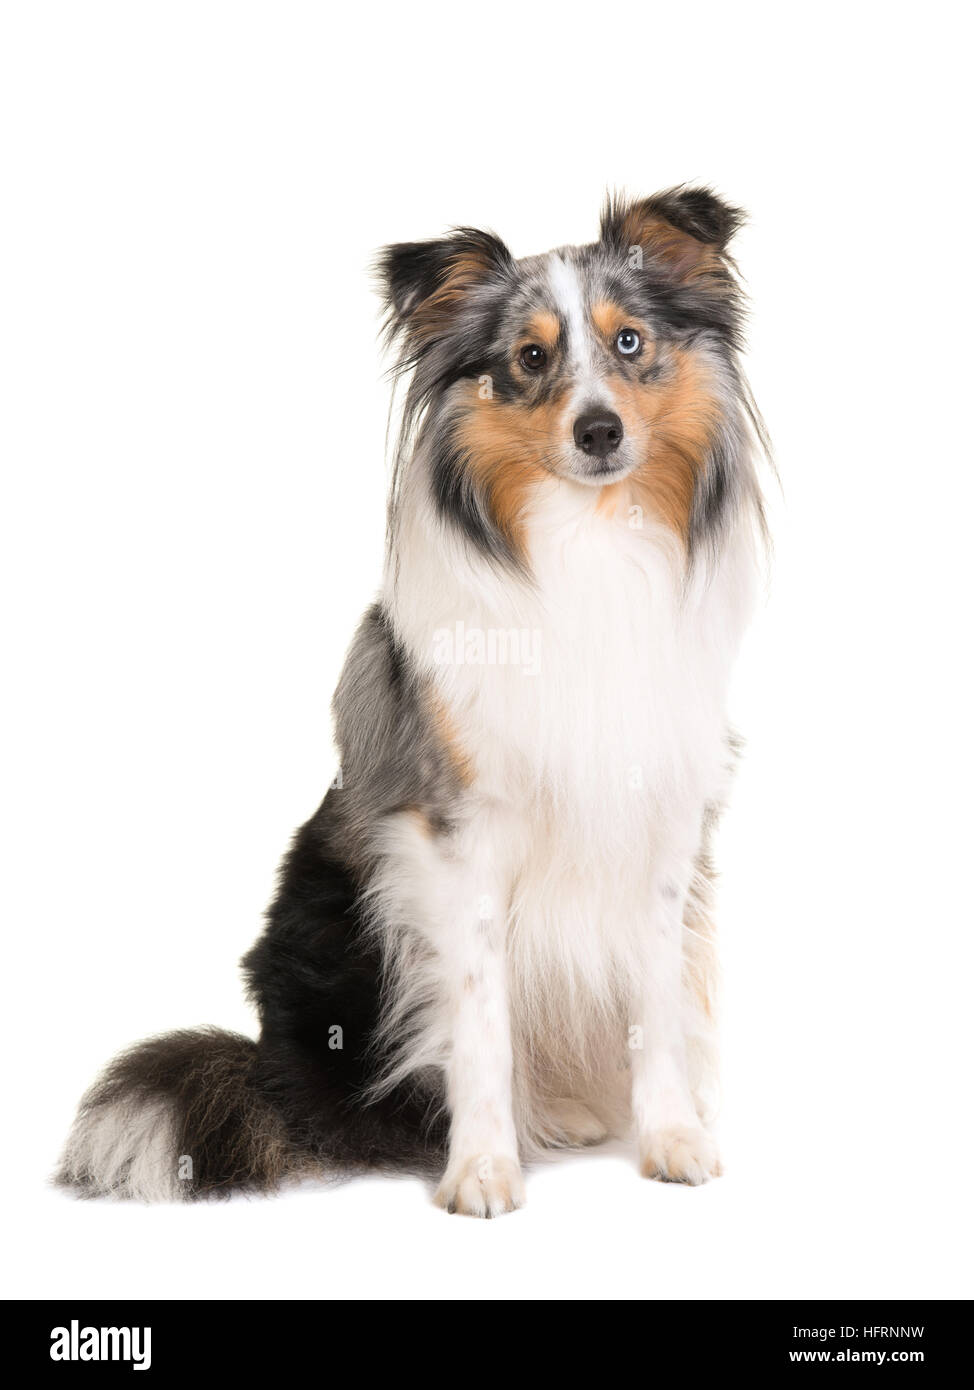 Pretty sitting shetland sheepdog isolated on a white background facing the camera Stock Photo